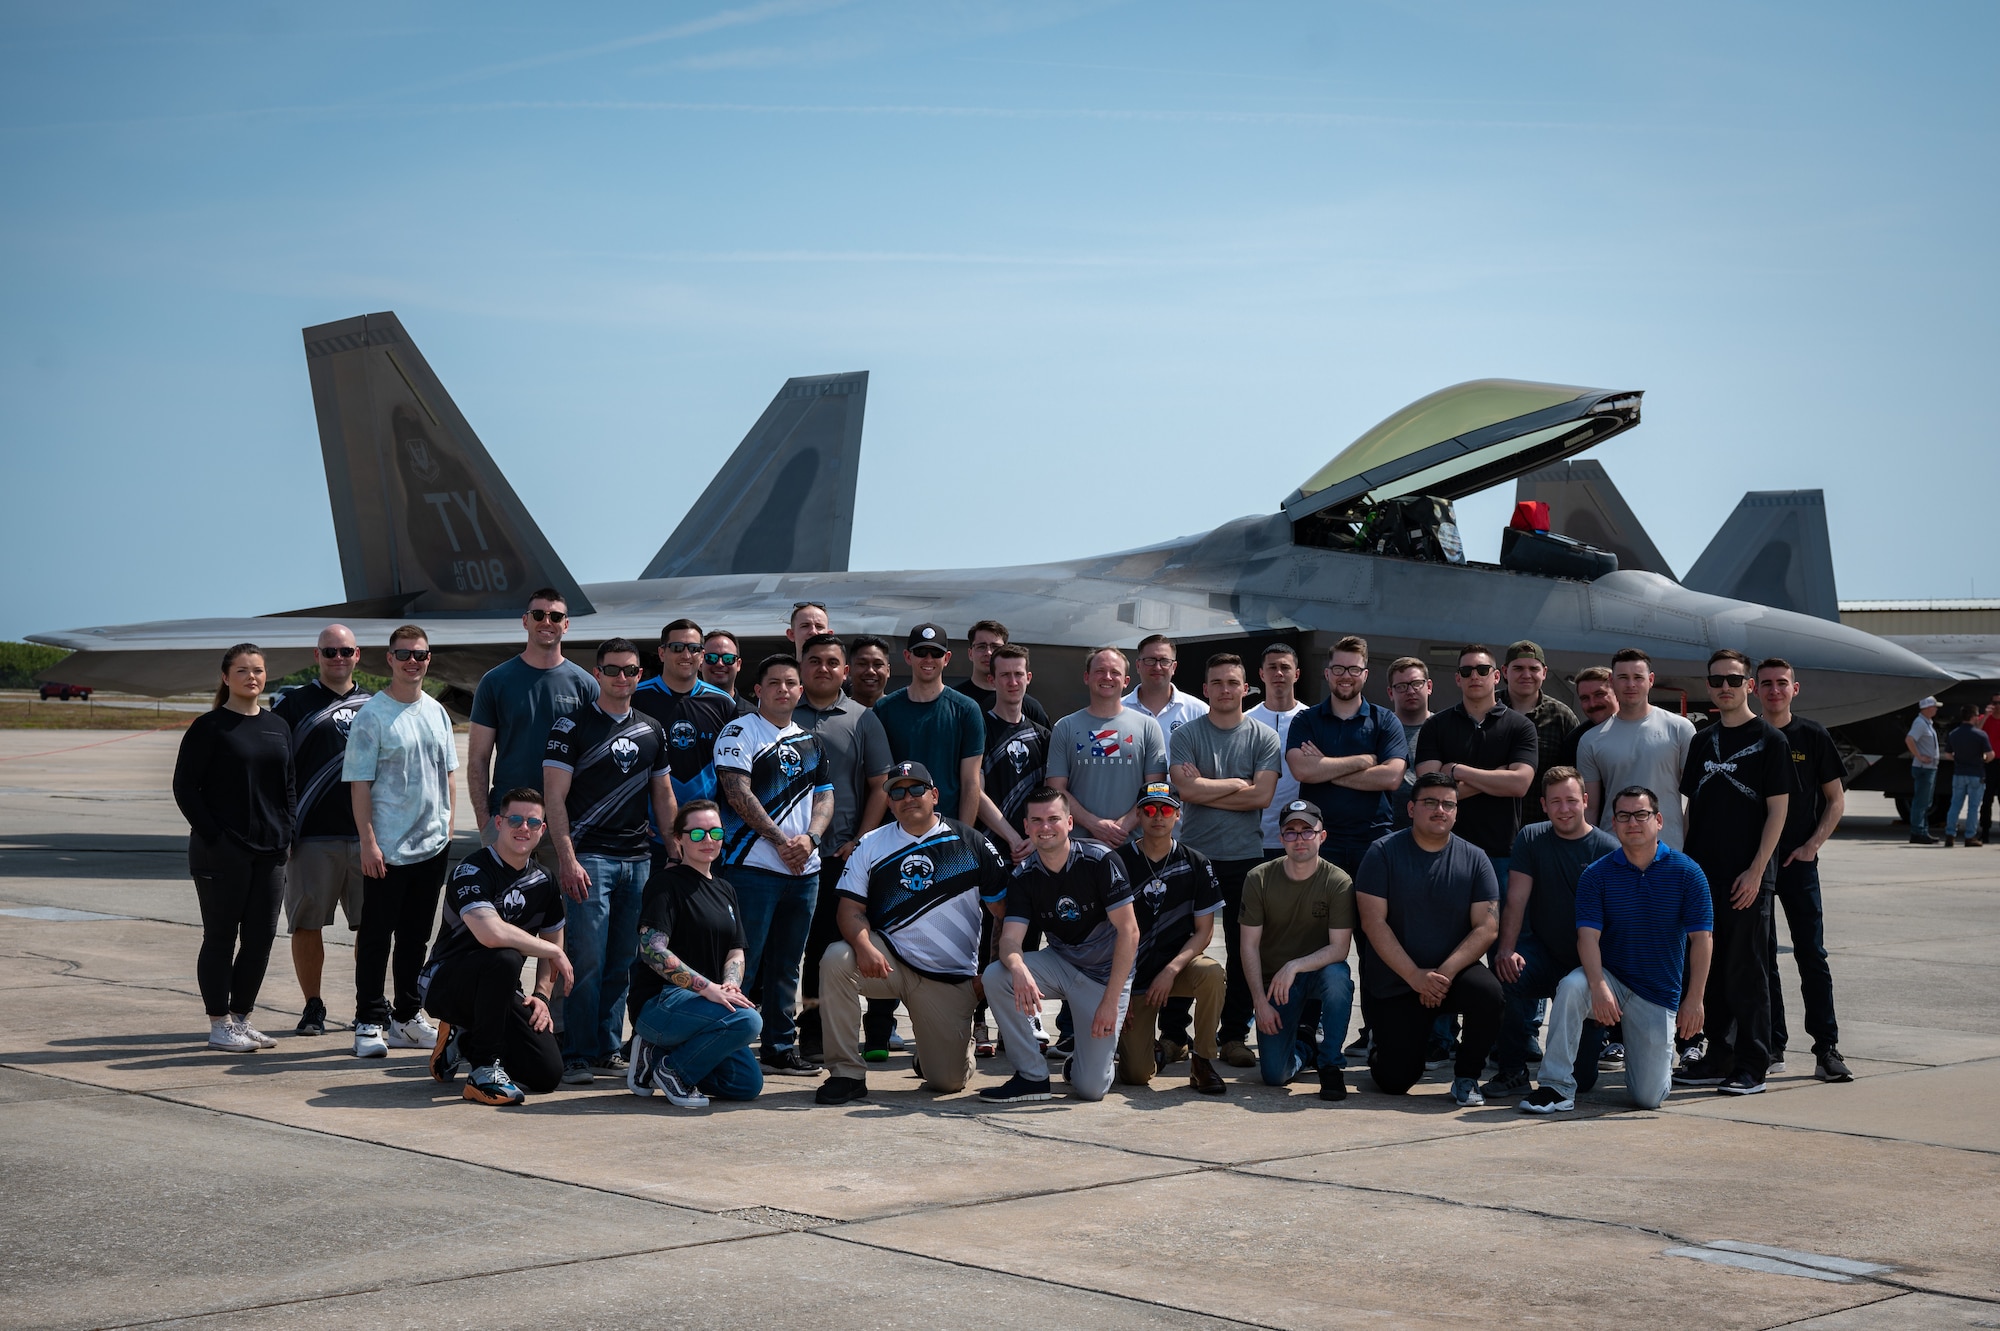 U.S. Air Force and U.S. Space Force gaming teams tour F-22 Raptors at Patrick Space Force Base, Fla., May 19, 2022. The top teams from the Spring season of the Department of the Air Force Gaming competed at PSFB for a chance to represent the USAF and the USSF at FORCECON 2022, the Armed Forces Sports Halo Championship, and the first ever U.S. government esports event. (U.S. Space Force photo by Senior Airman Thomas Sjoberg)